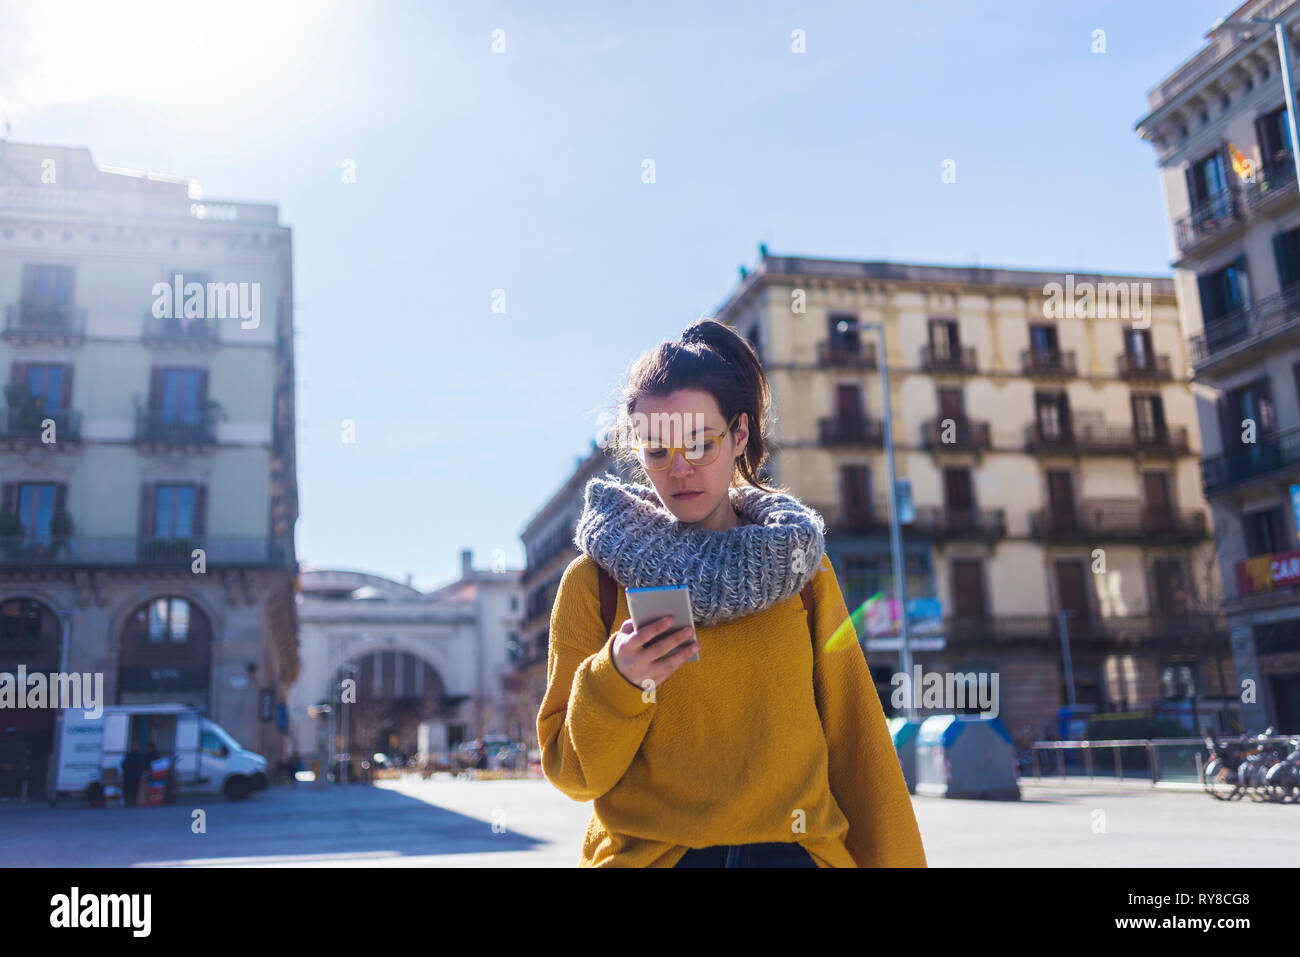 Fashionable female tourist wearing warm clothing using smart phone while standing in city during sunny day Stock Photo